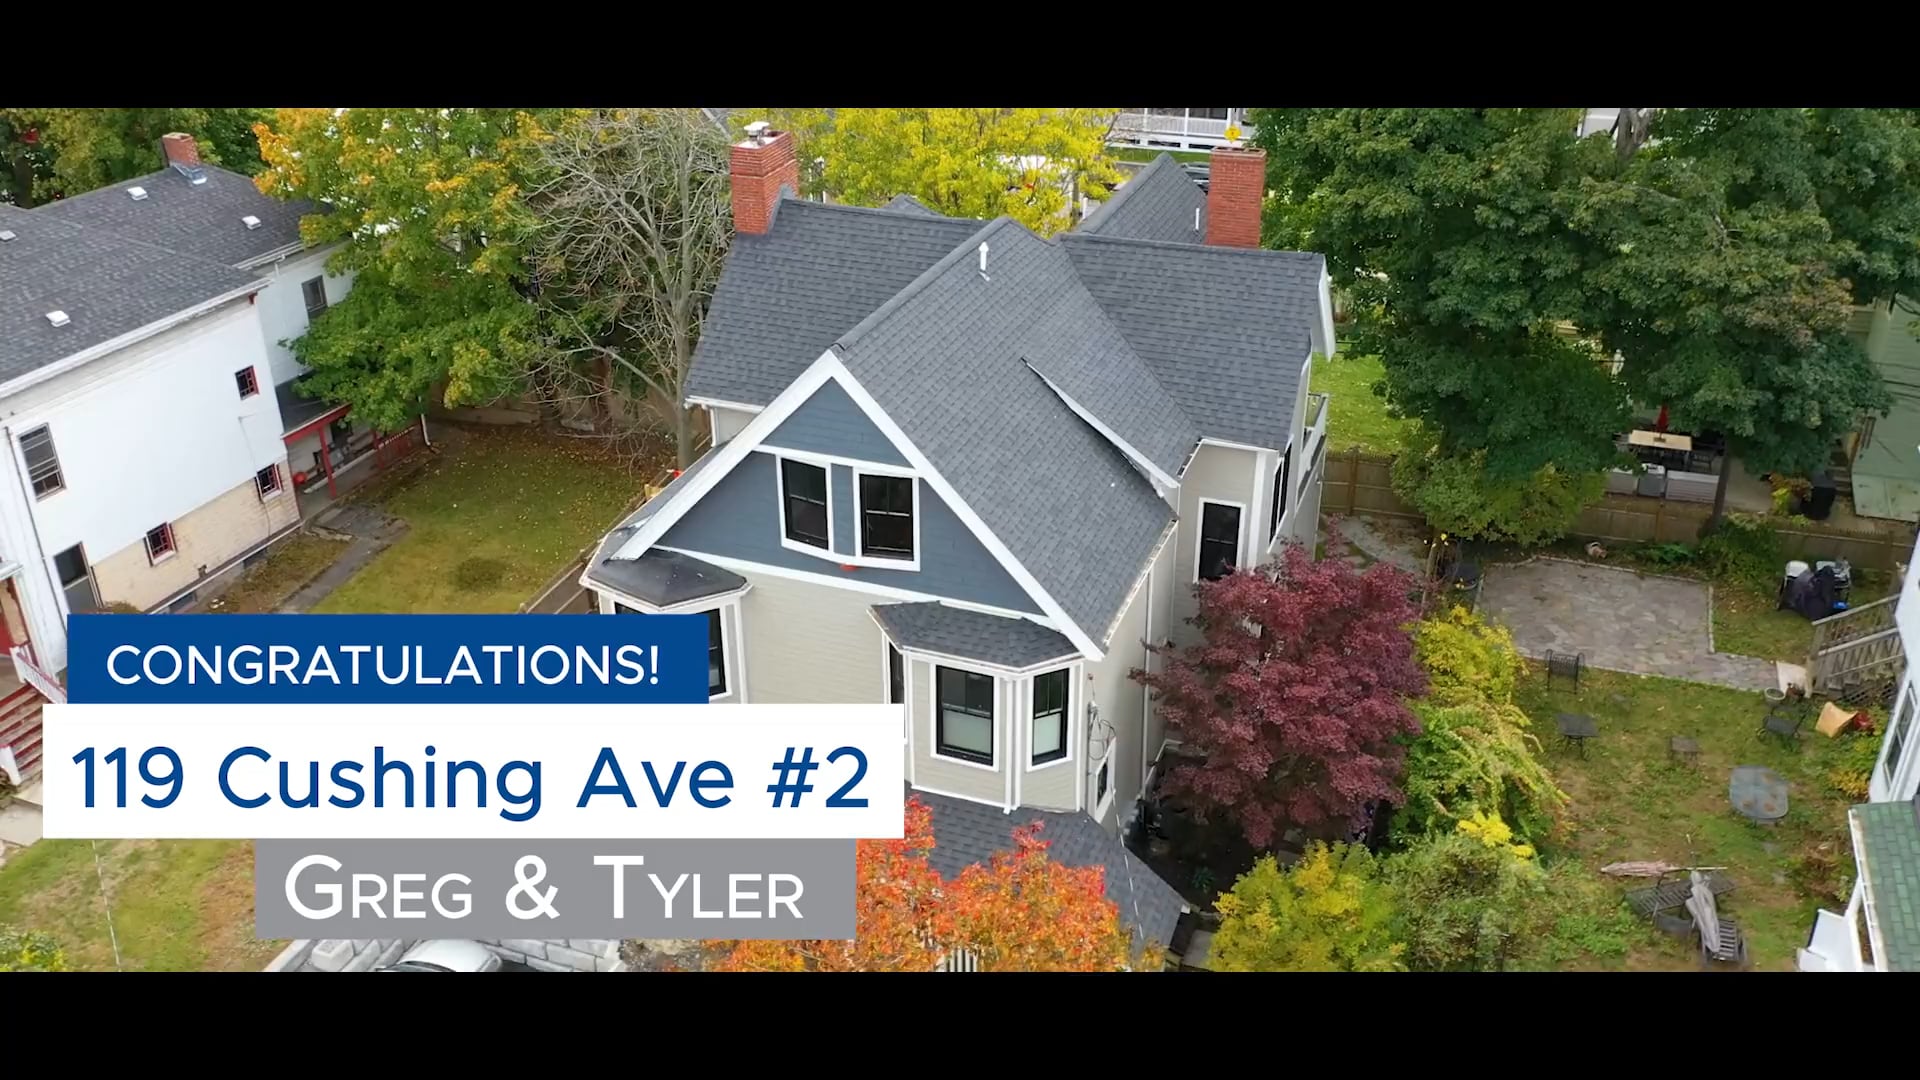 119 Cushing Ave - Congratulations Greg and Tyler